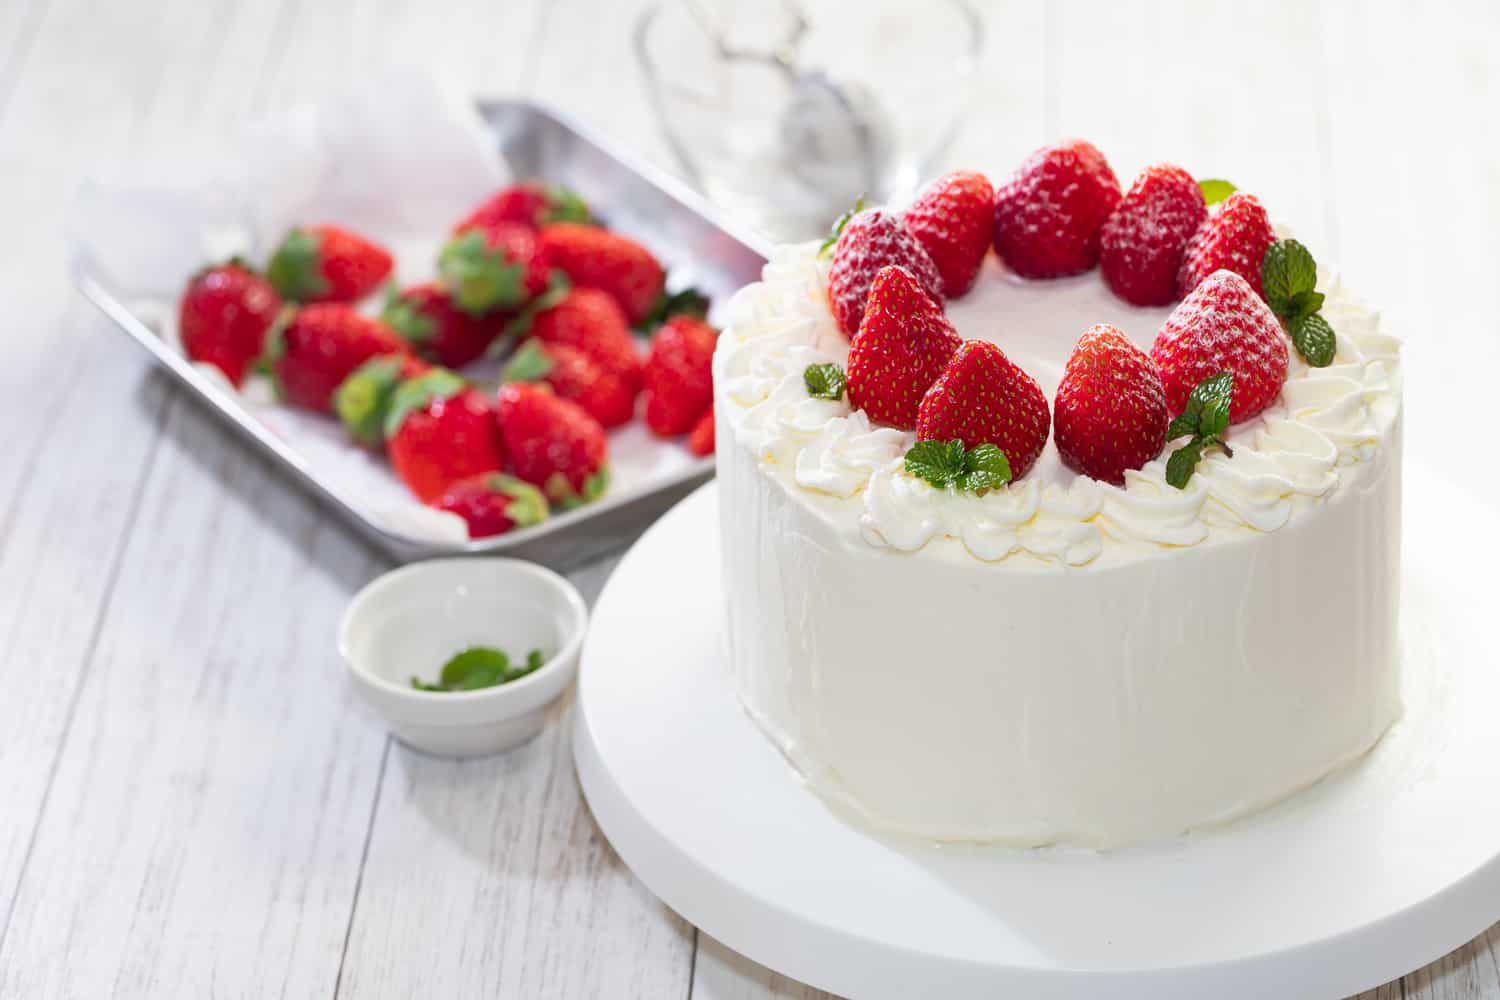 Strawberry and cream sponge cake on white wooden table